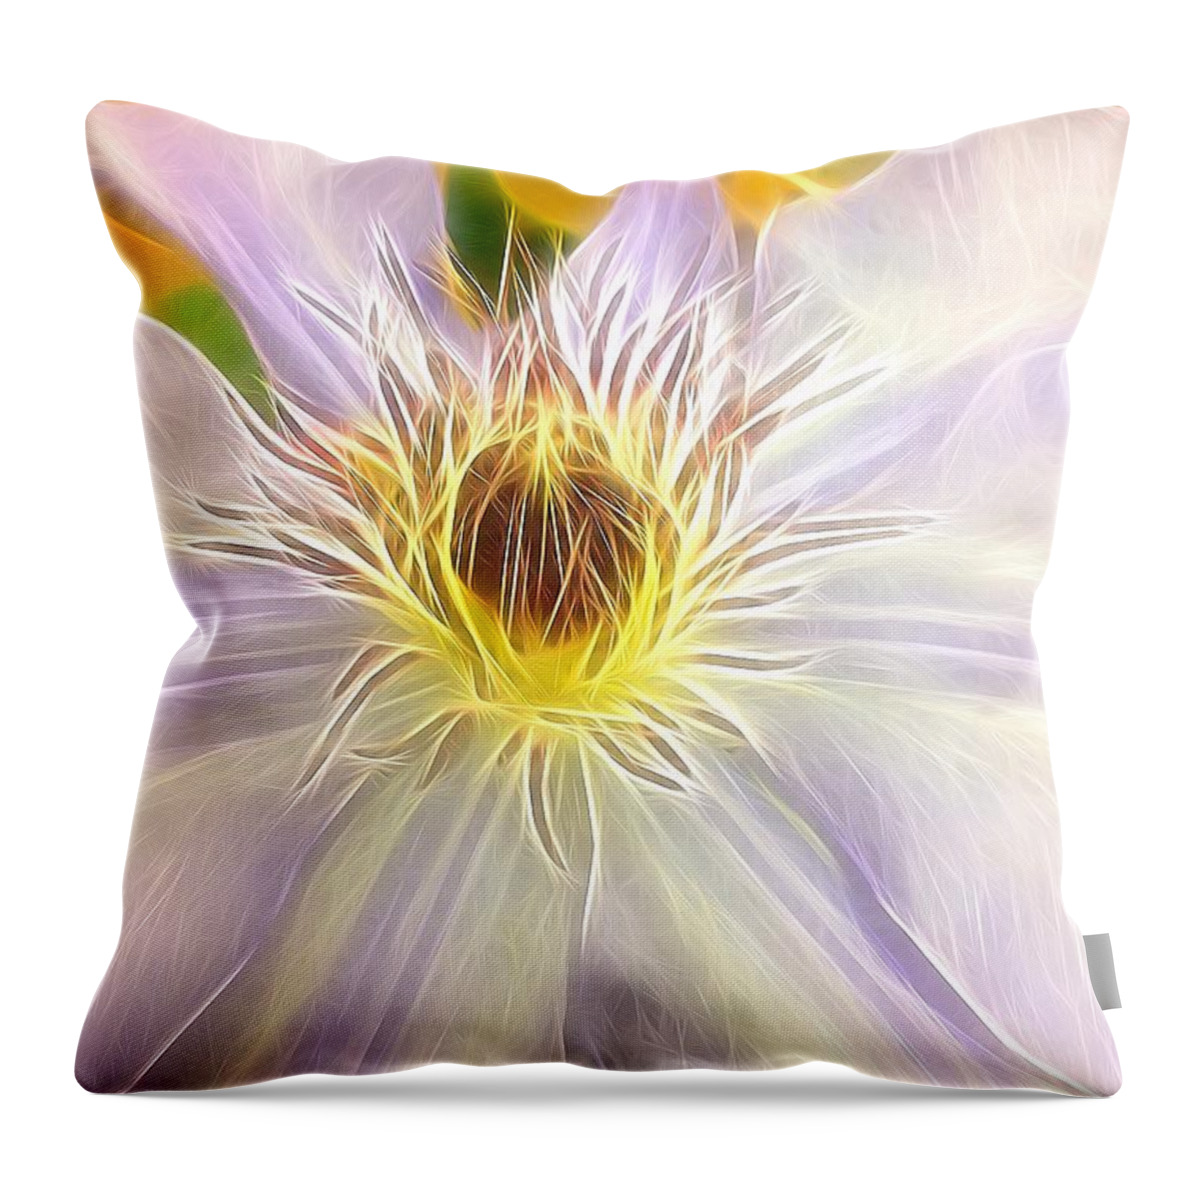 Image Created On Instagram Via @kmessmer53 Throw Pillow featuring the photograph Center Lit by Kathleen Messmer